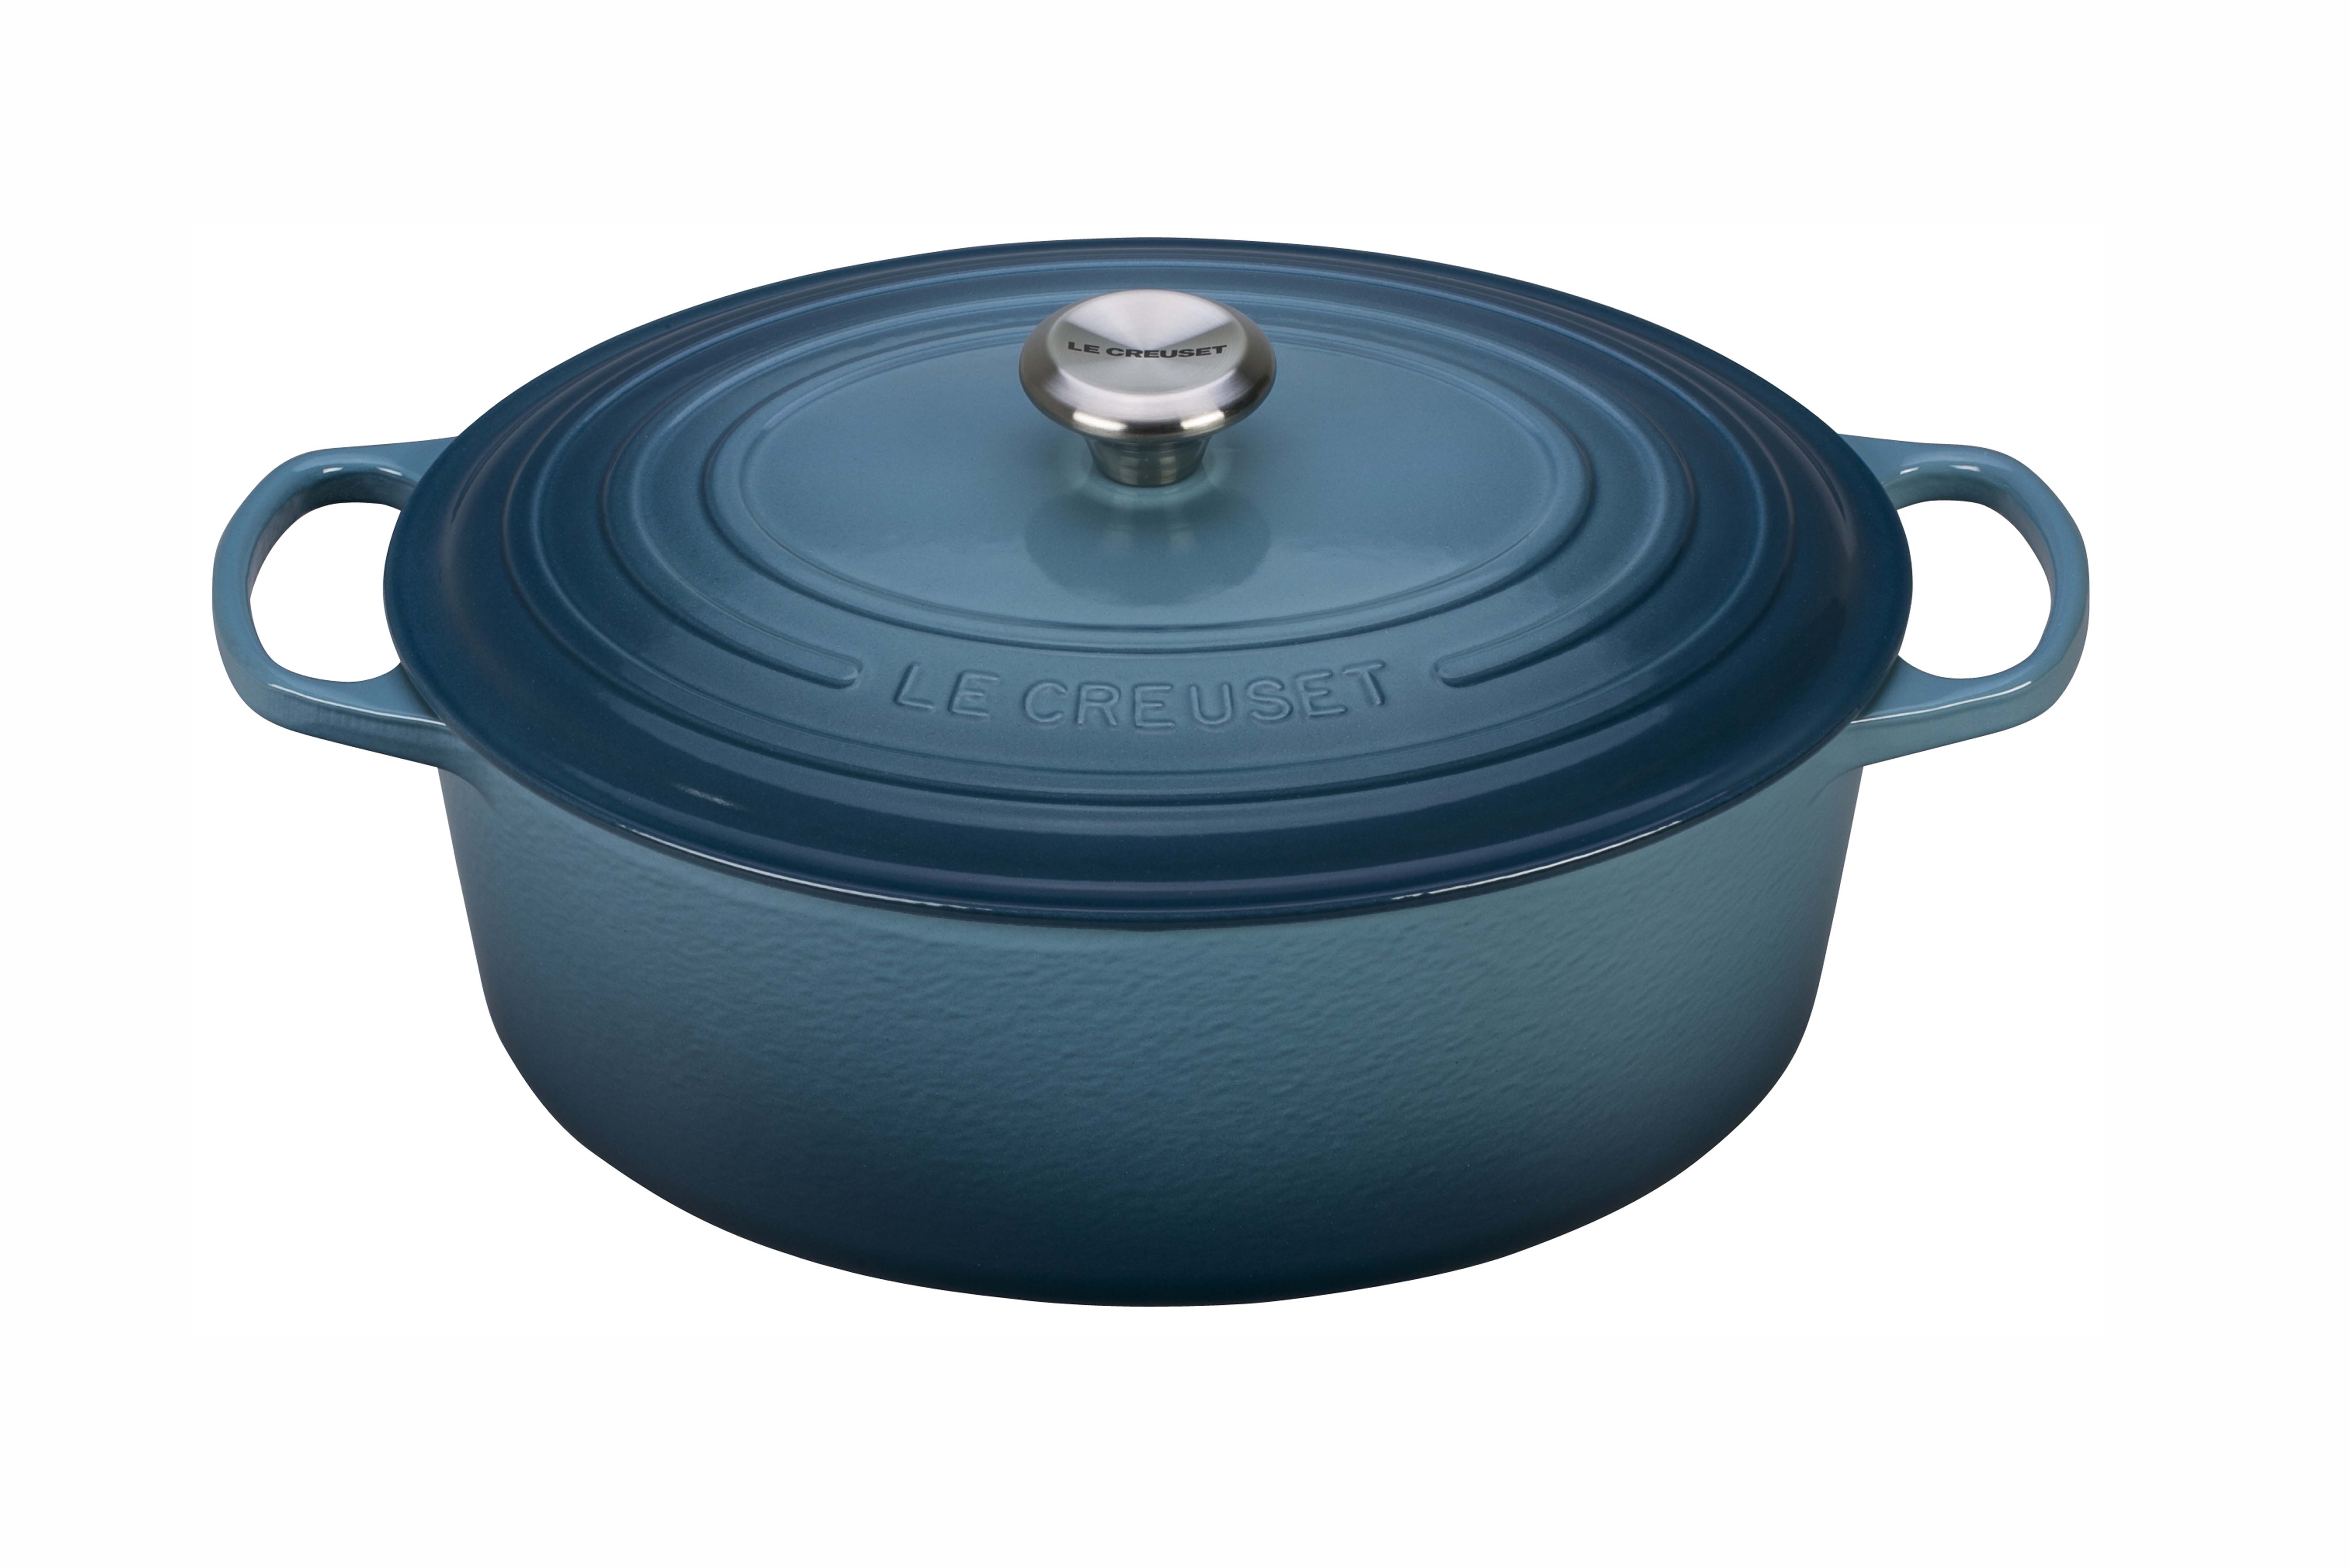 Buy 29cm Le Creuset Oval Casserole NZ | Available in Many Colours